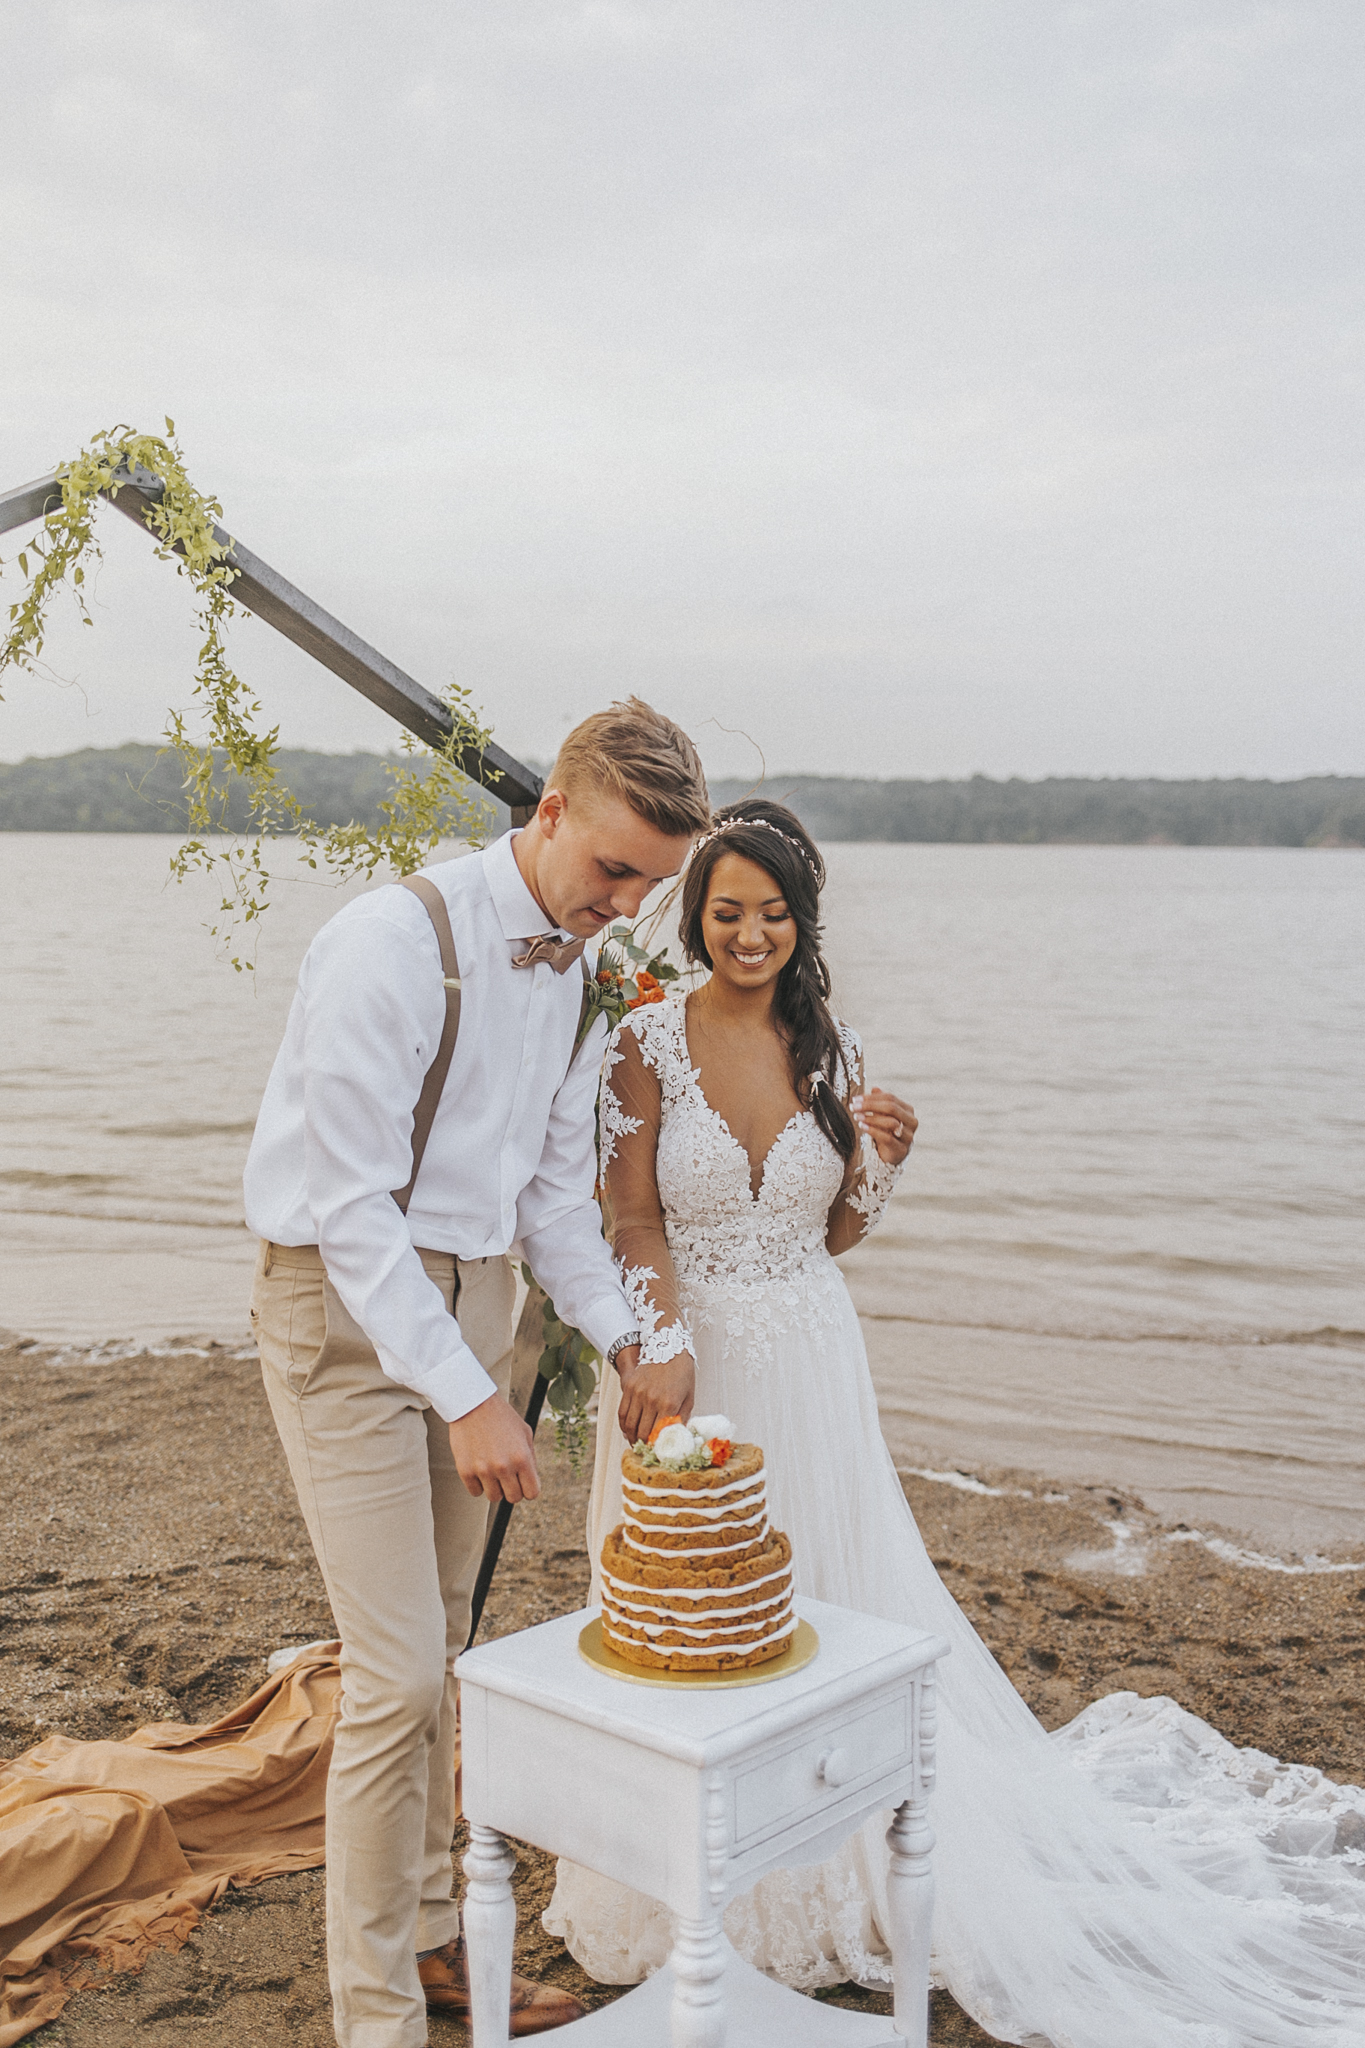  East Fork Lake Boho Elopement by Bare Moments Photography // cincinnati wedding photography // cake cutting, cut the cake, wedding cakes, 